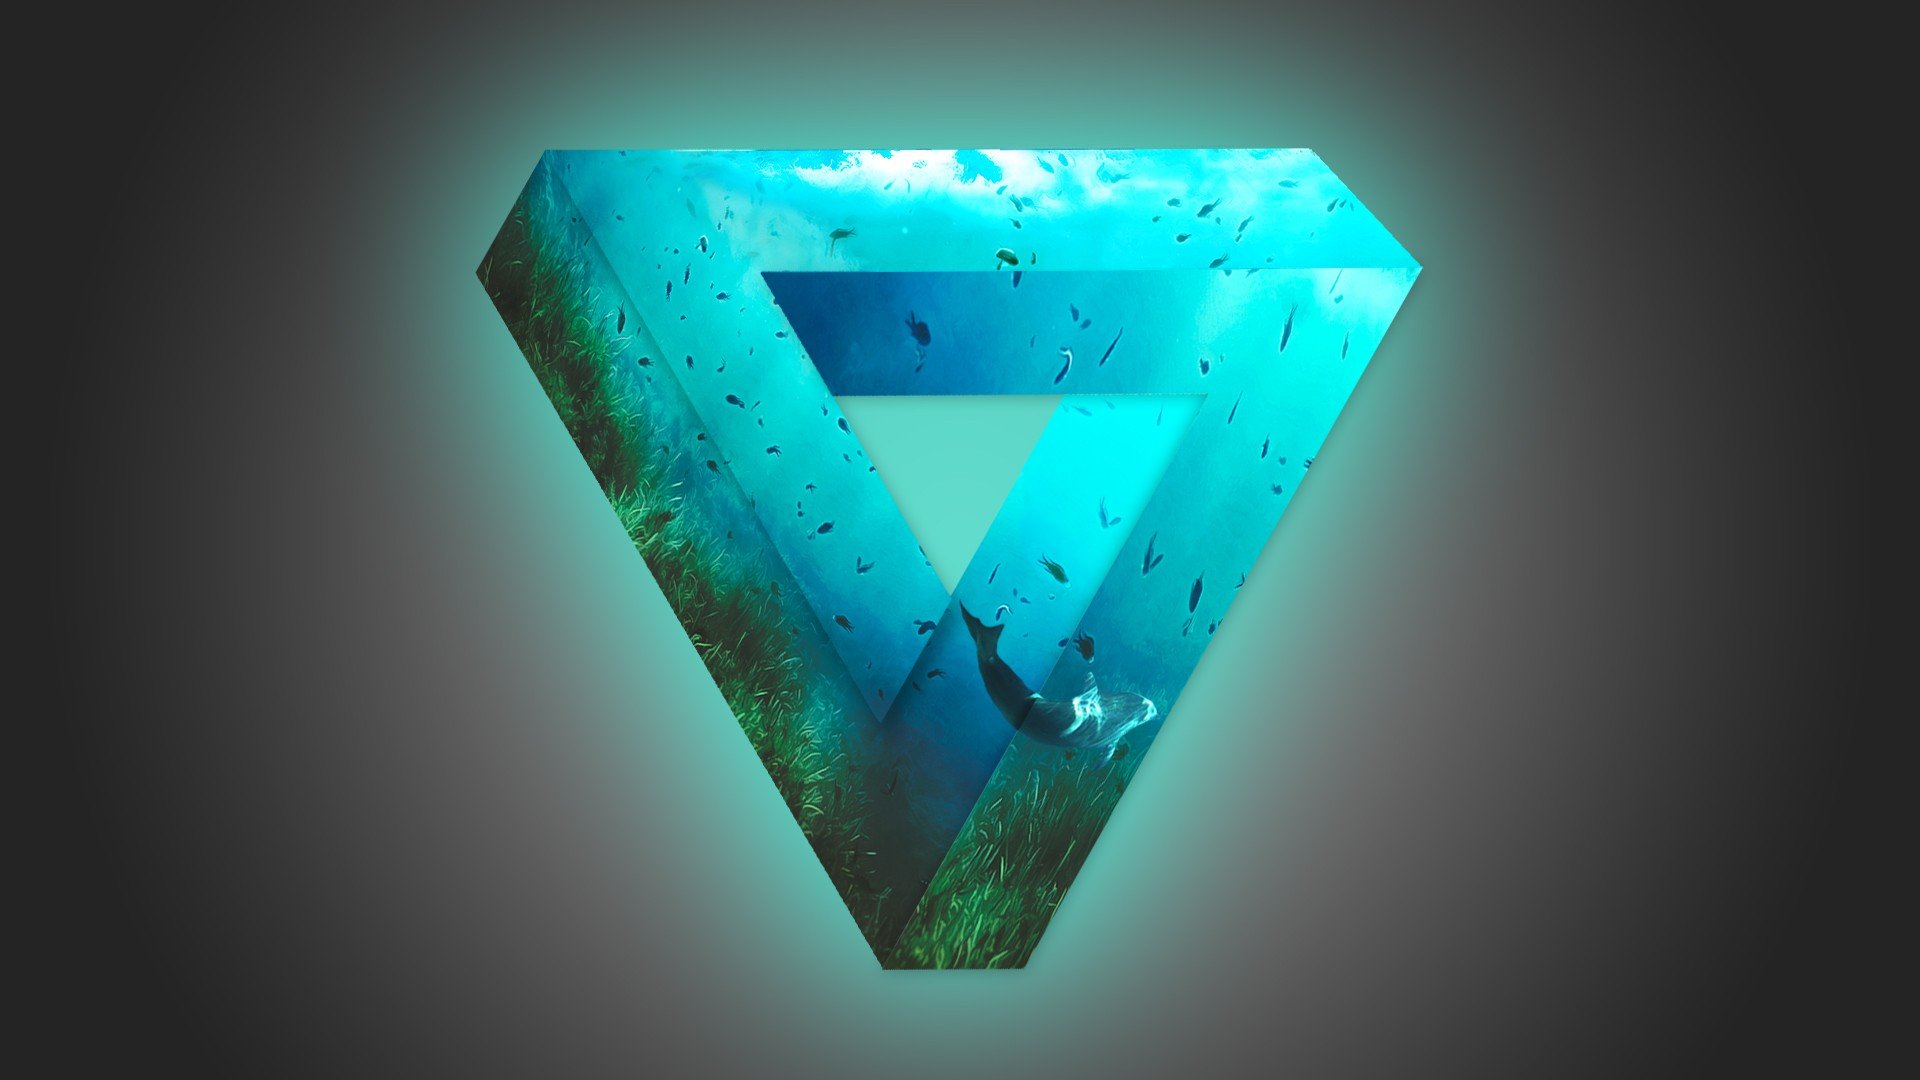 soft gradient, Triangle, Glowing, Fish, Photoshop, Whale, Penrose triangle, Underwater Wallpaper